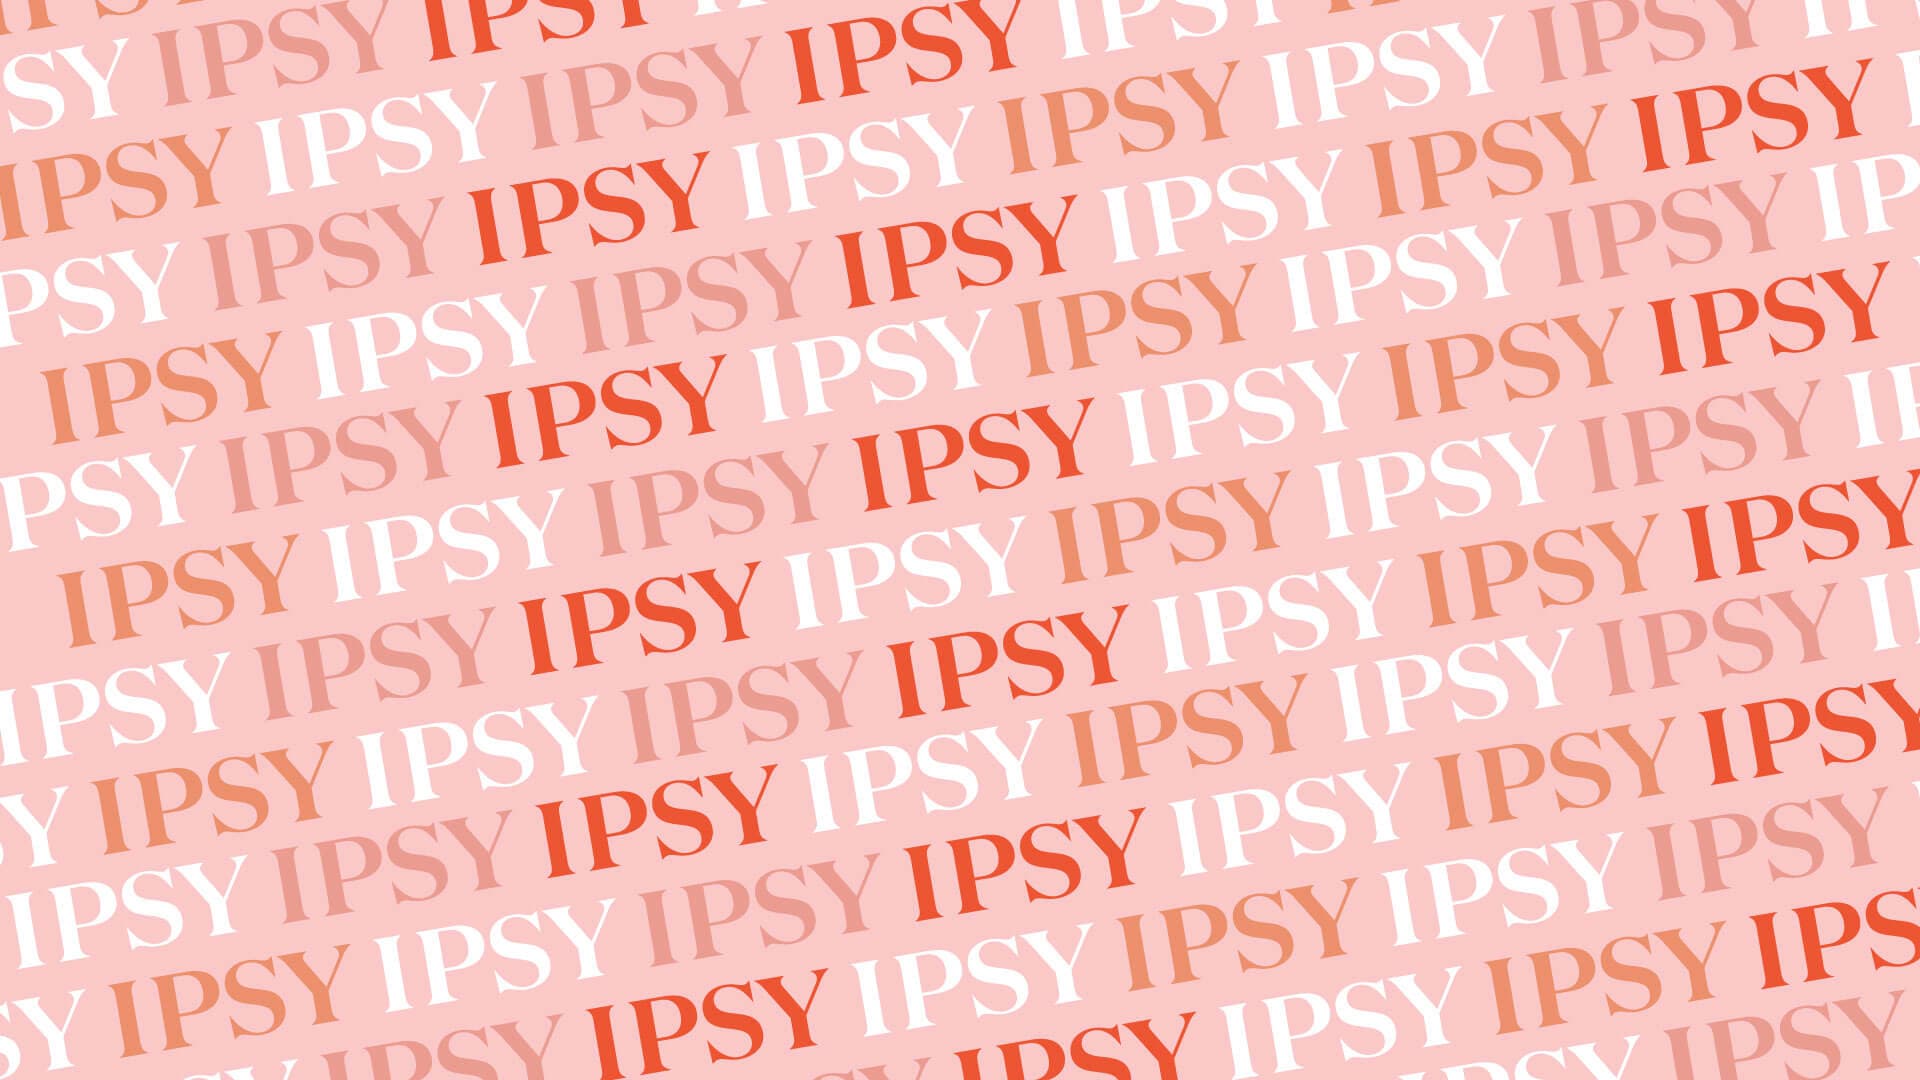 A Zoom background of the IPSY logo repeated. 